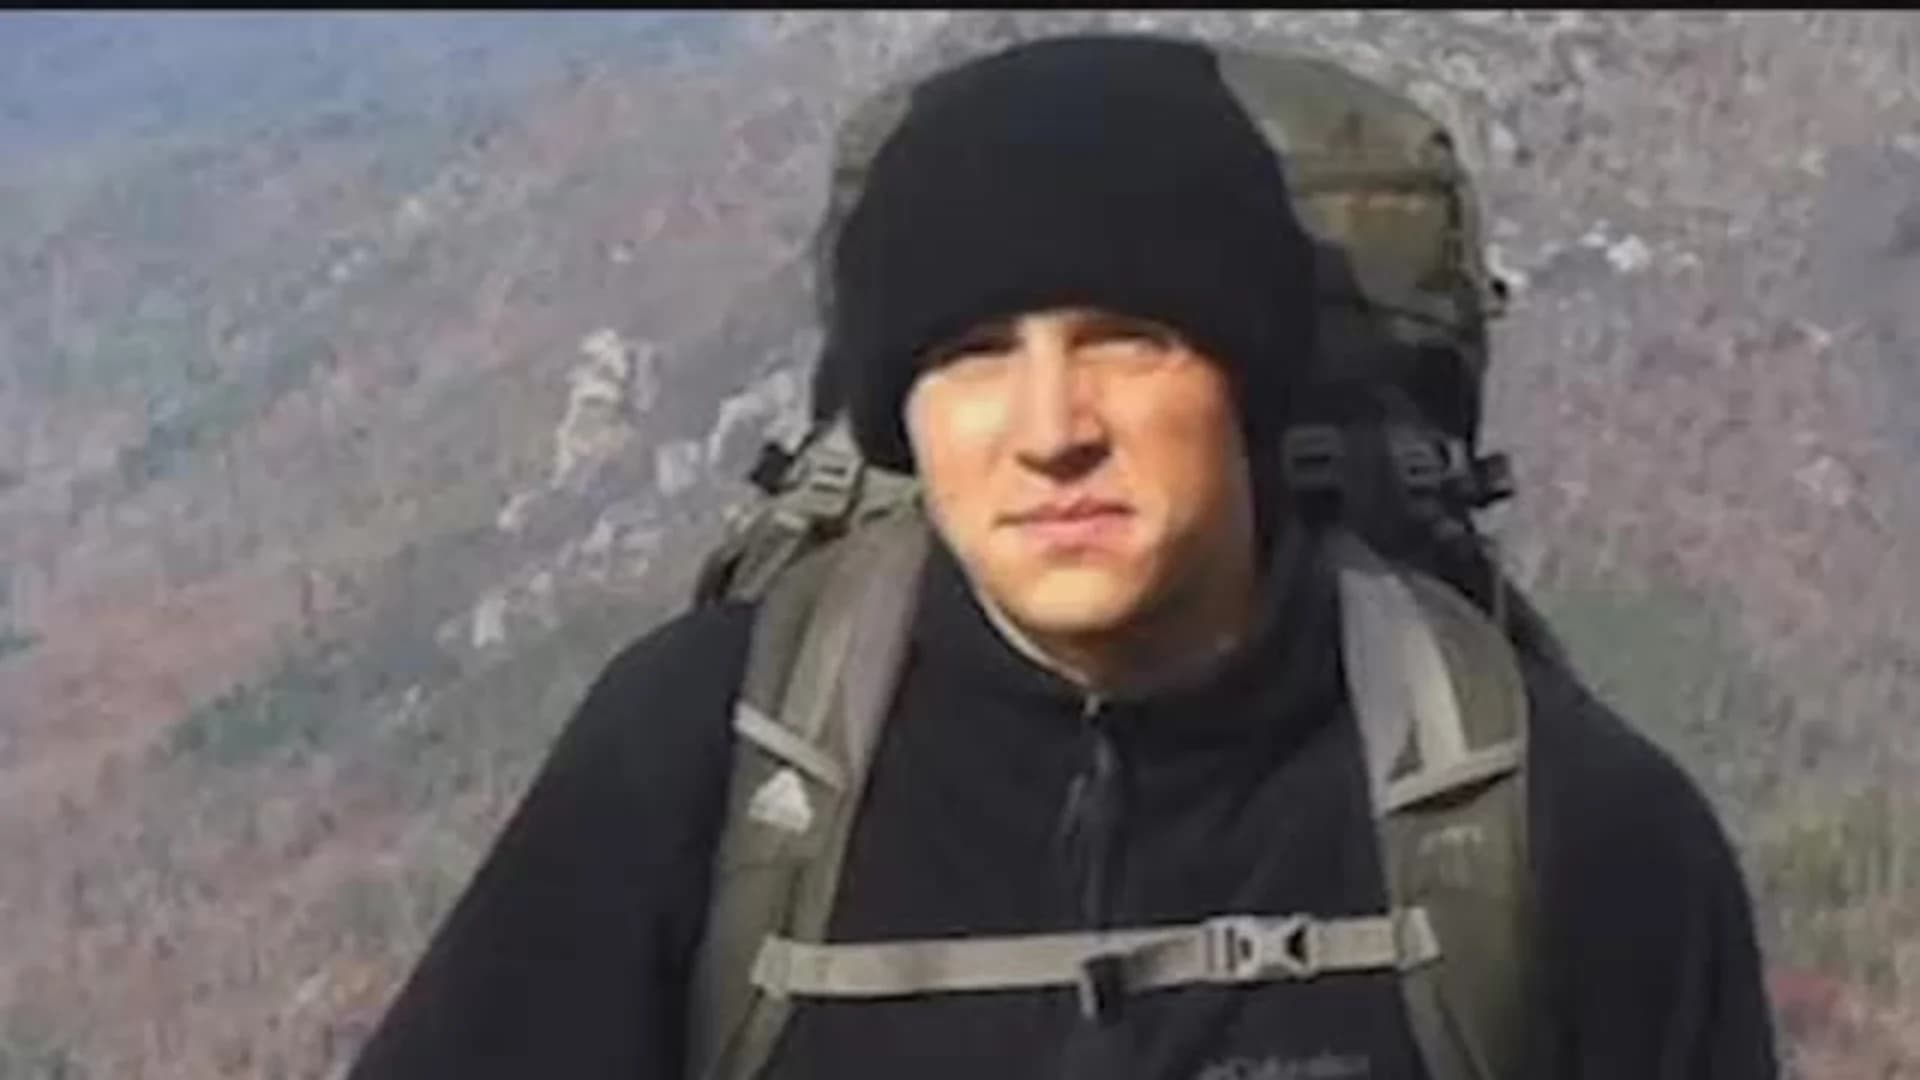 Authorities: Missing Marine from Connecticut left for a 195-mile hike last month